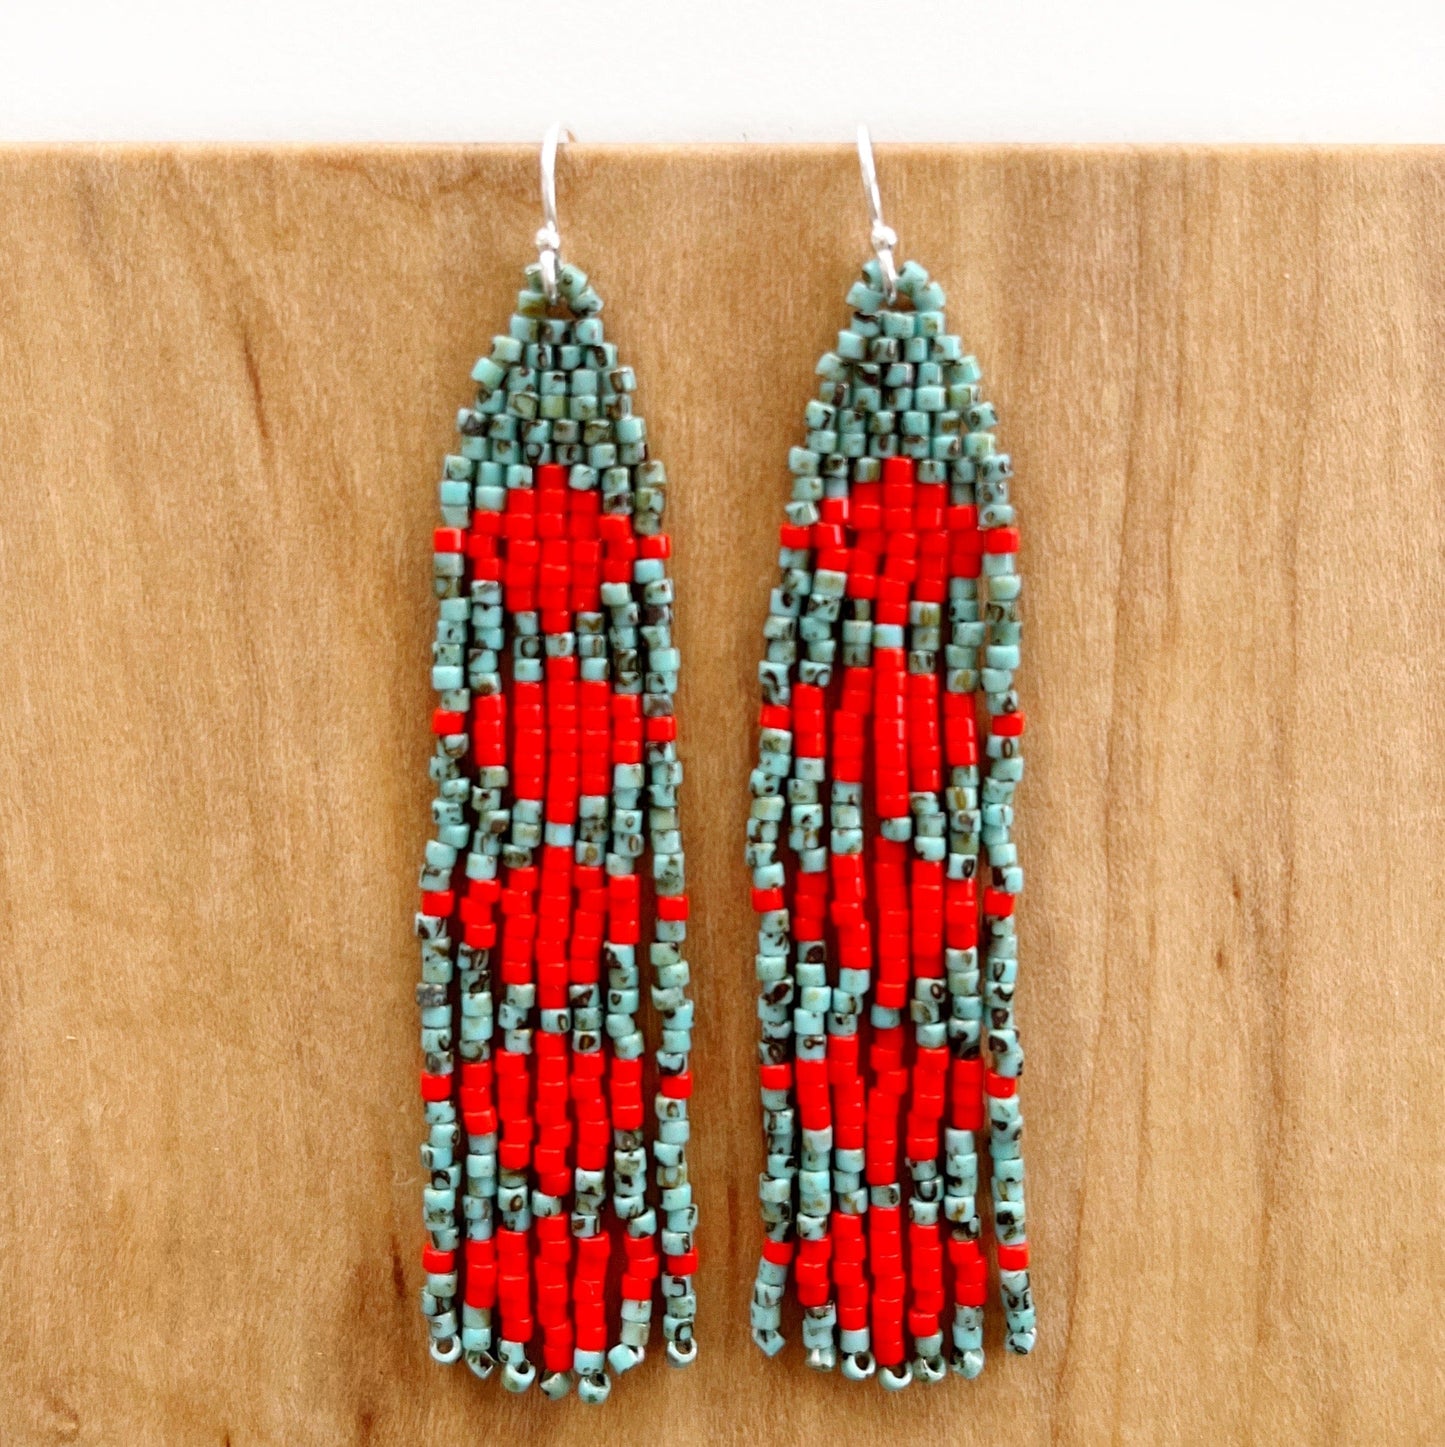 Lillie Nell Pokni Earrings in Turquoise + Neon Red